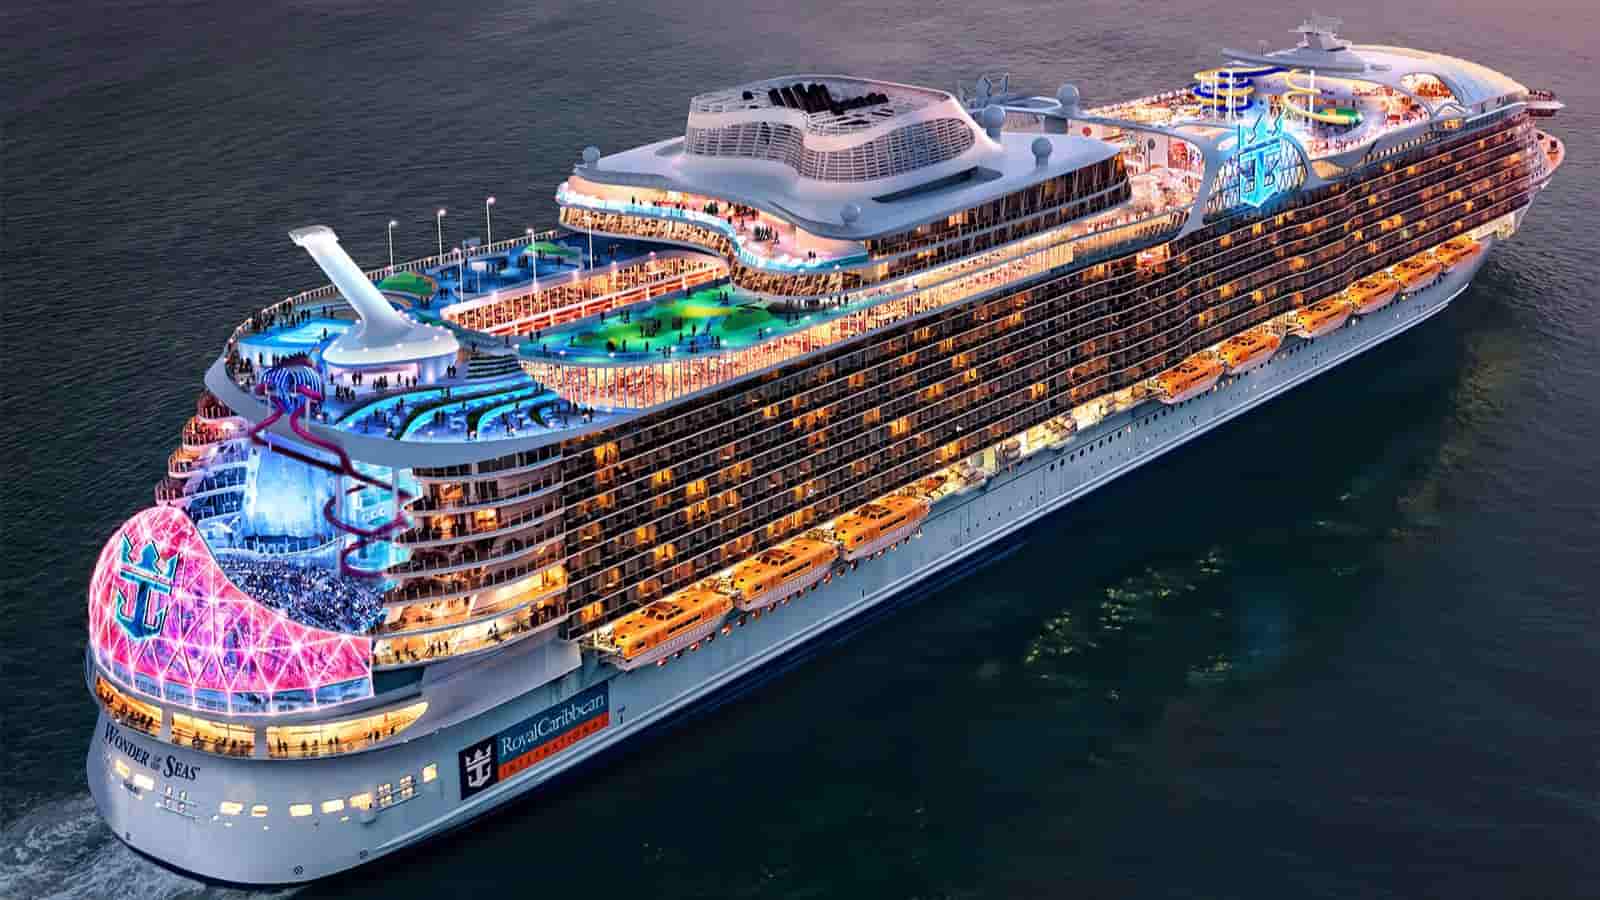 Royal Caribbean's WiFi Package: All you need to know about Cost, Limits, offers and how to buy